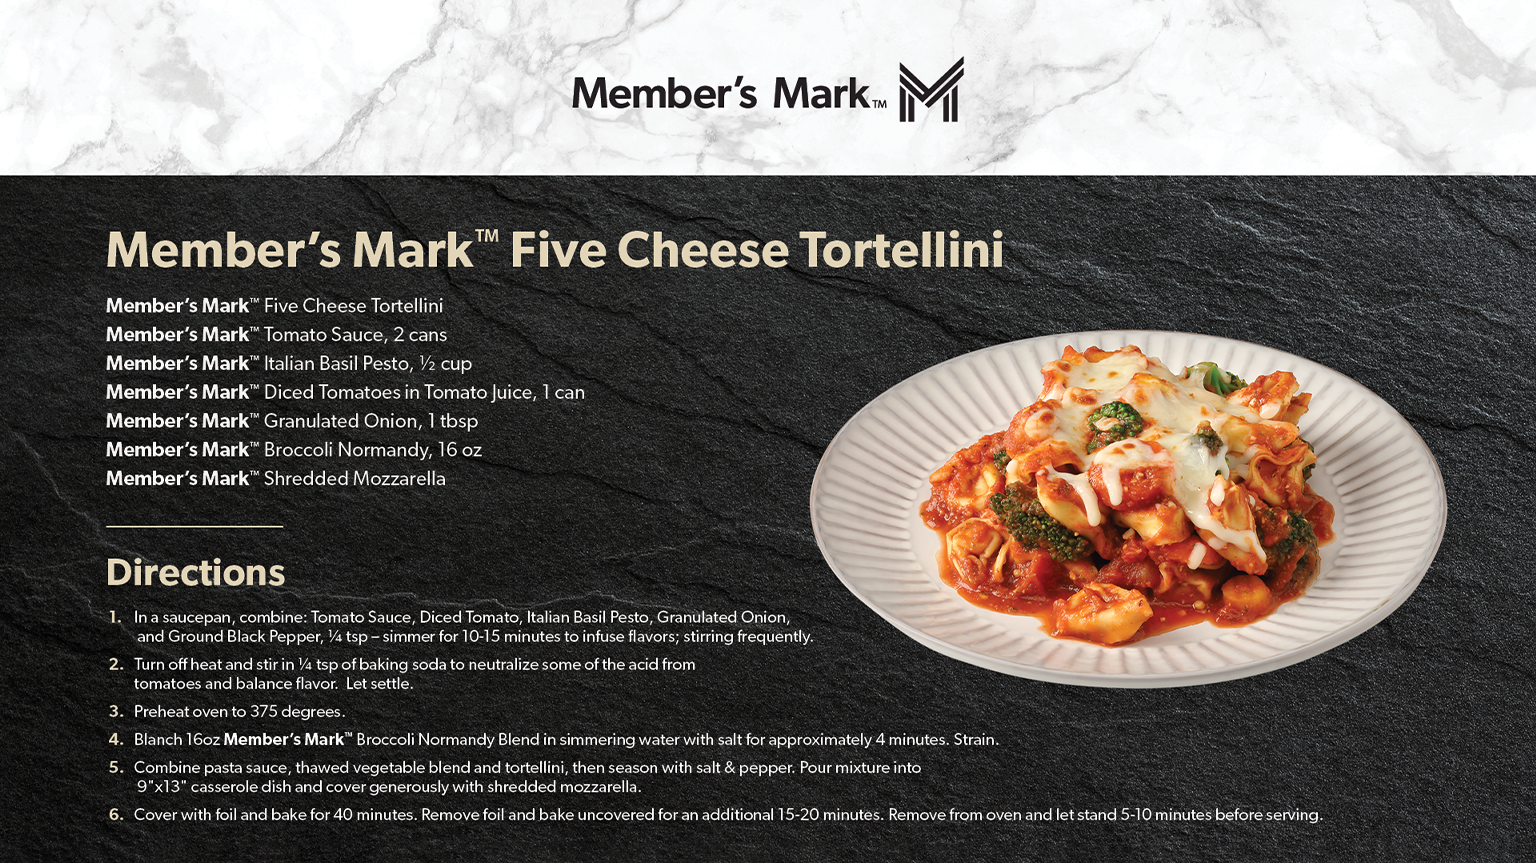 Ingredients and recipe for Member’s Mark Five Cheese Tortellini.